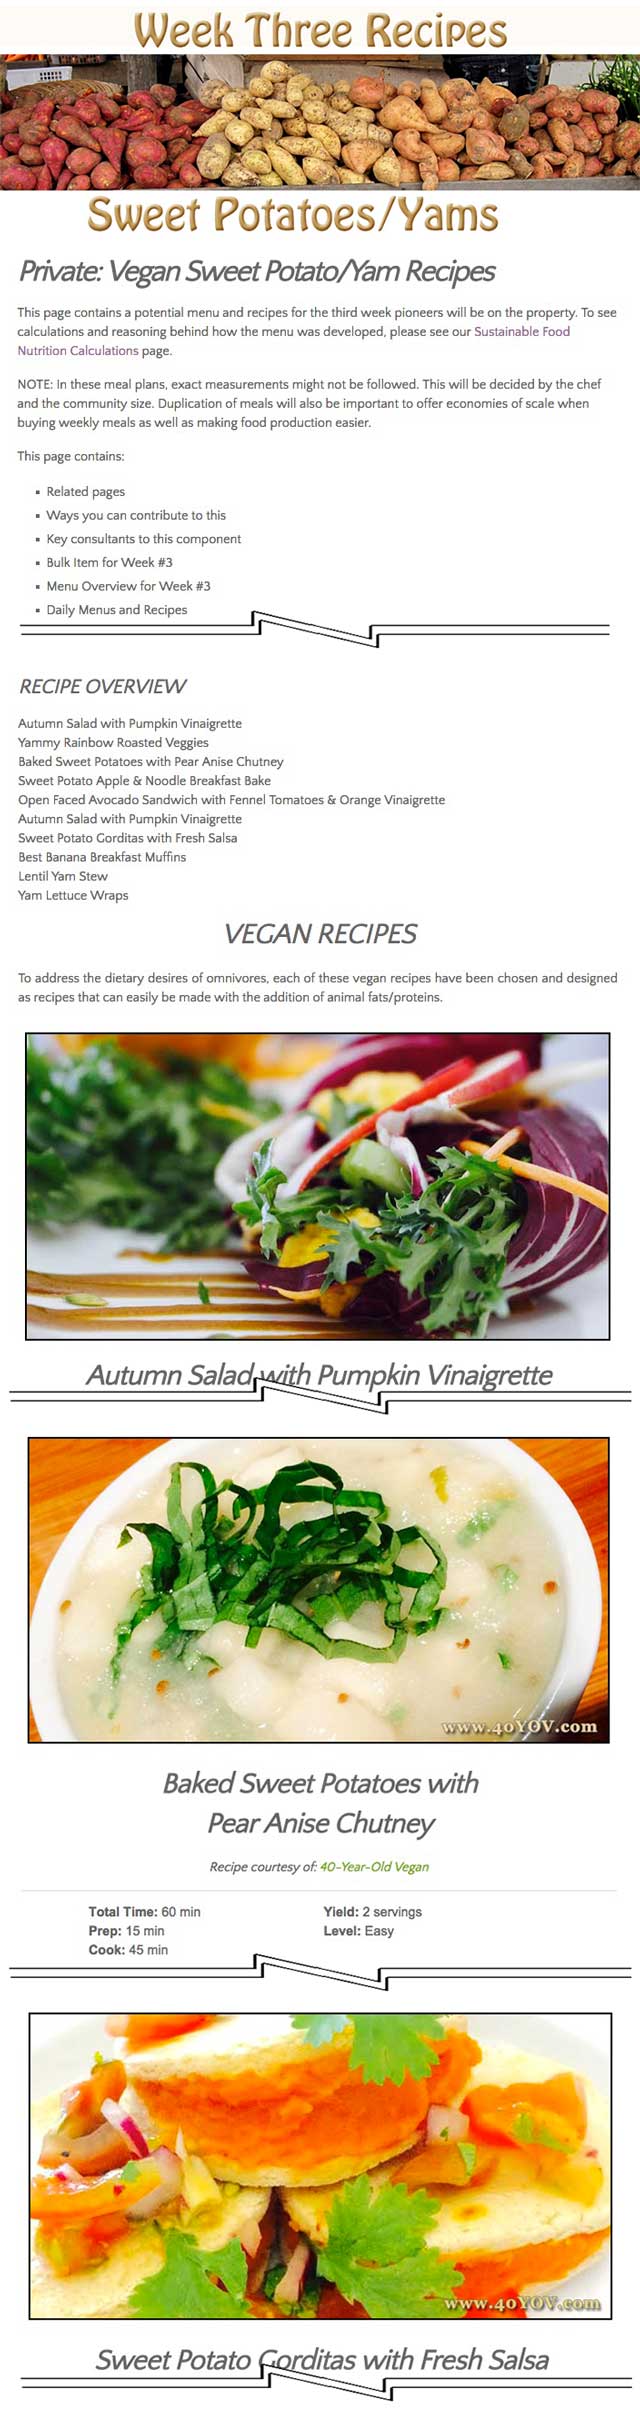 As part of the development of our Food Self-sufficiency Transition Plan, which features contributions from Naturopathic Doctor Matt Marturano (creator of the COHERENT model for comprehensive digestive health), this week the core team compiled the sweet potato recipes, as you can see here. , restoring sustainable balance